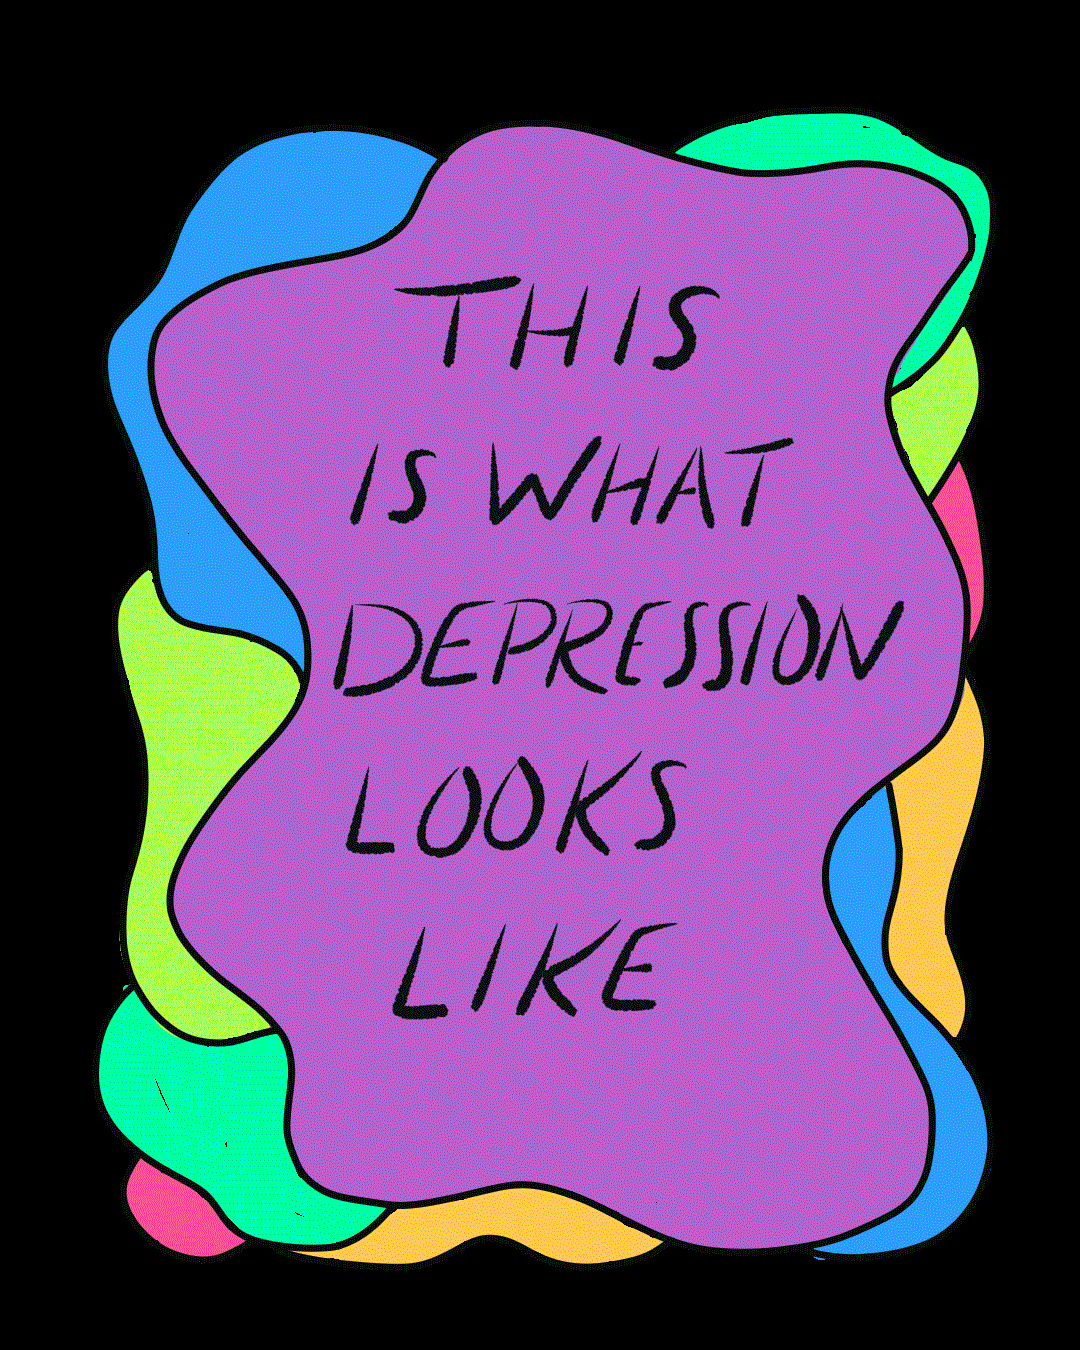 Random shapes reading, "This is what depression looks like"